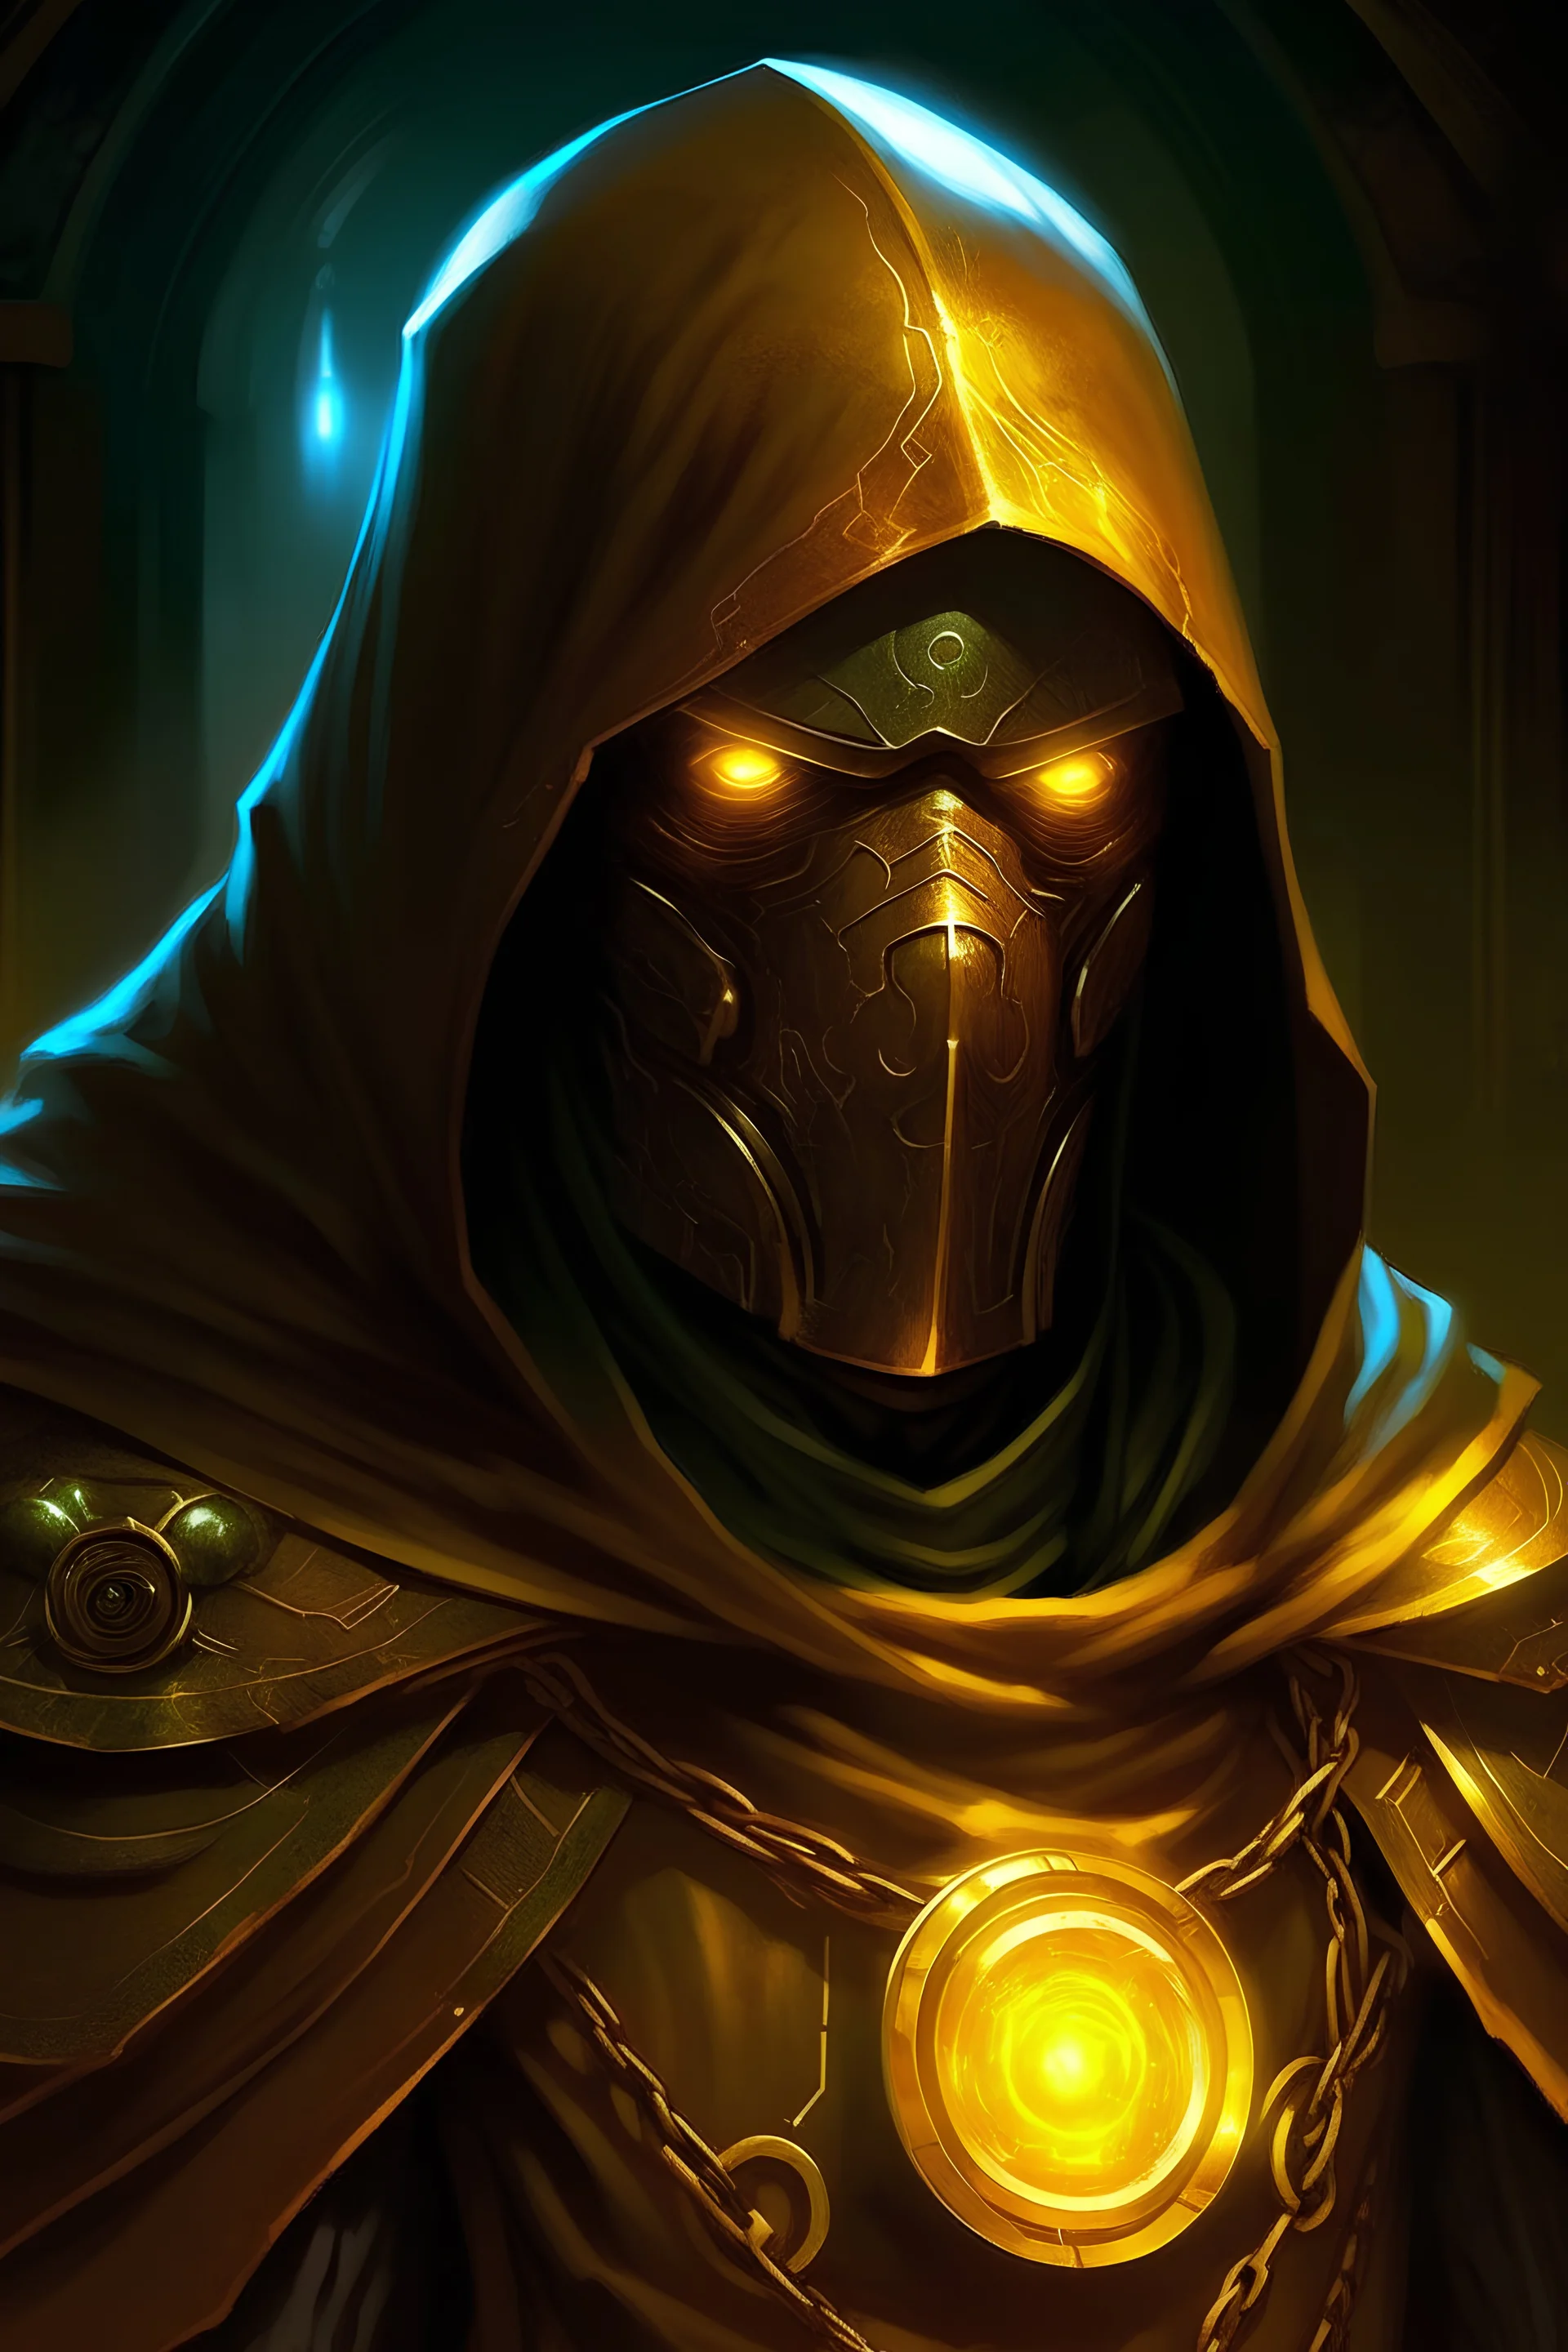 Warforged, made of copper, glowing yellow eyes, wearing cloak